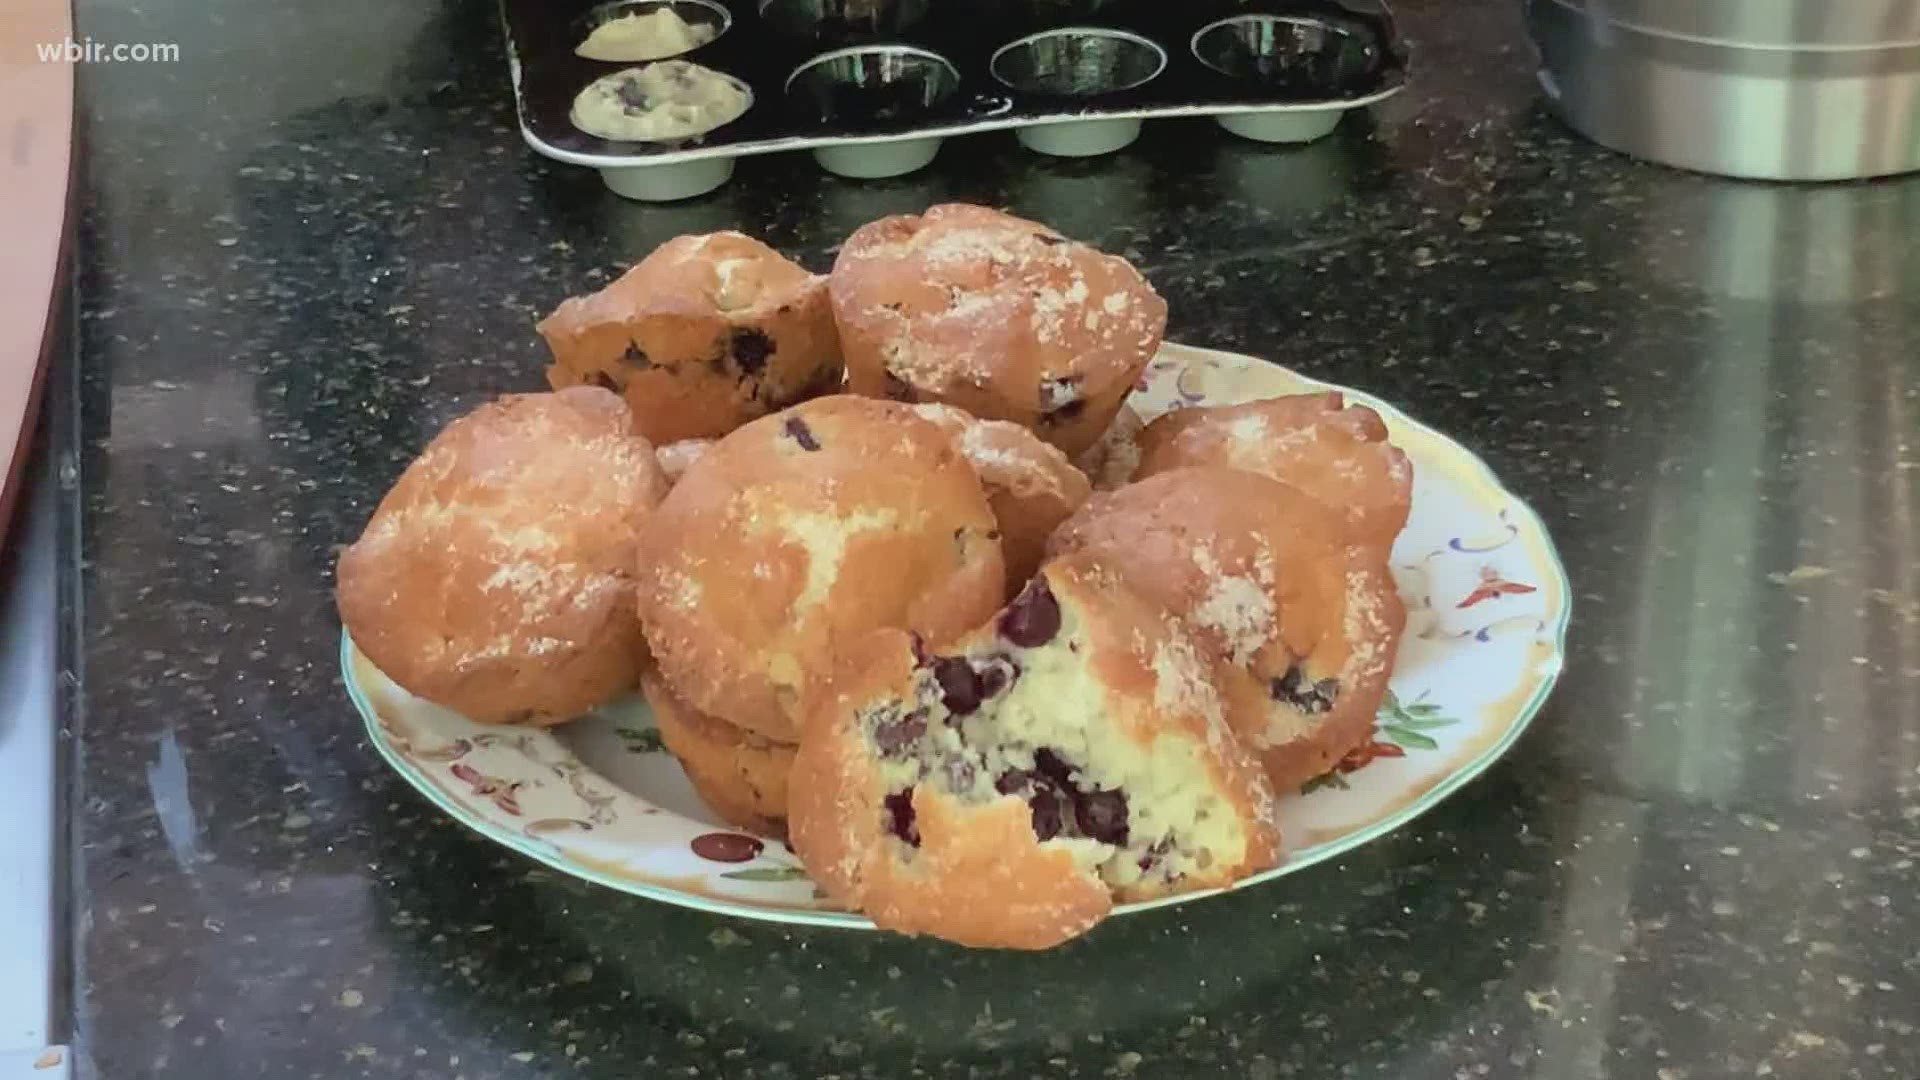 Terri Geiser with the UT Culinary Institute shares a recipe for homemade blueberry muffins. July 24, 2020-4pm.